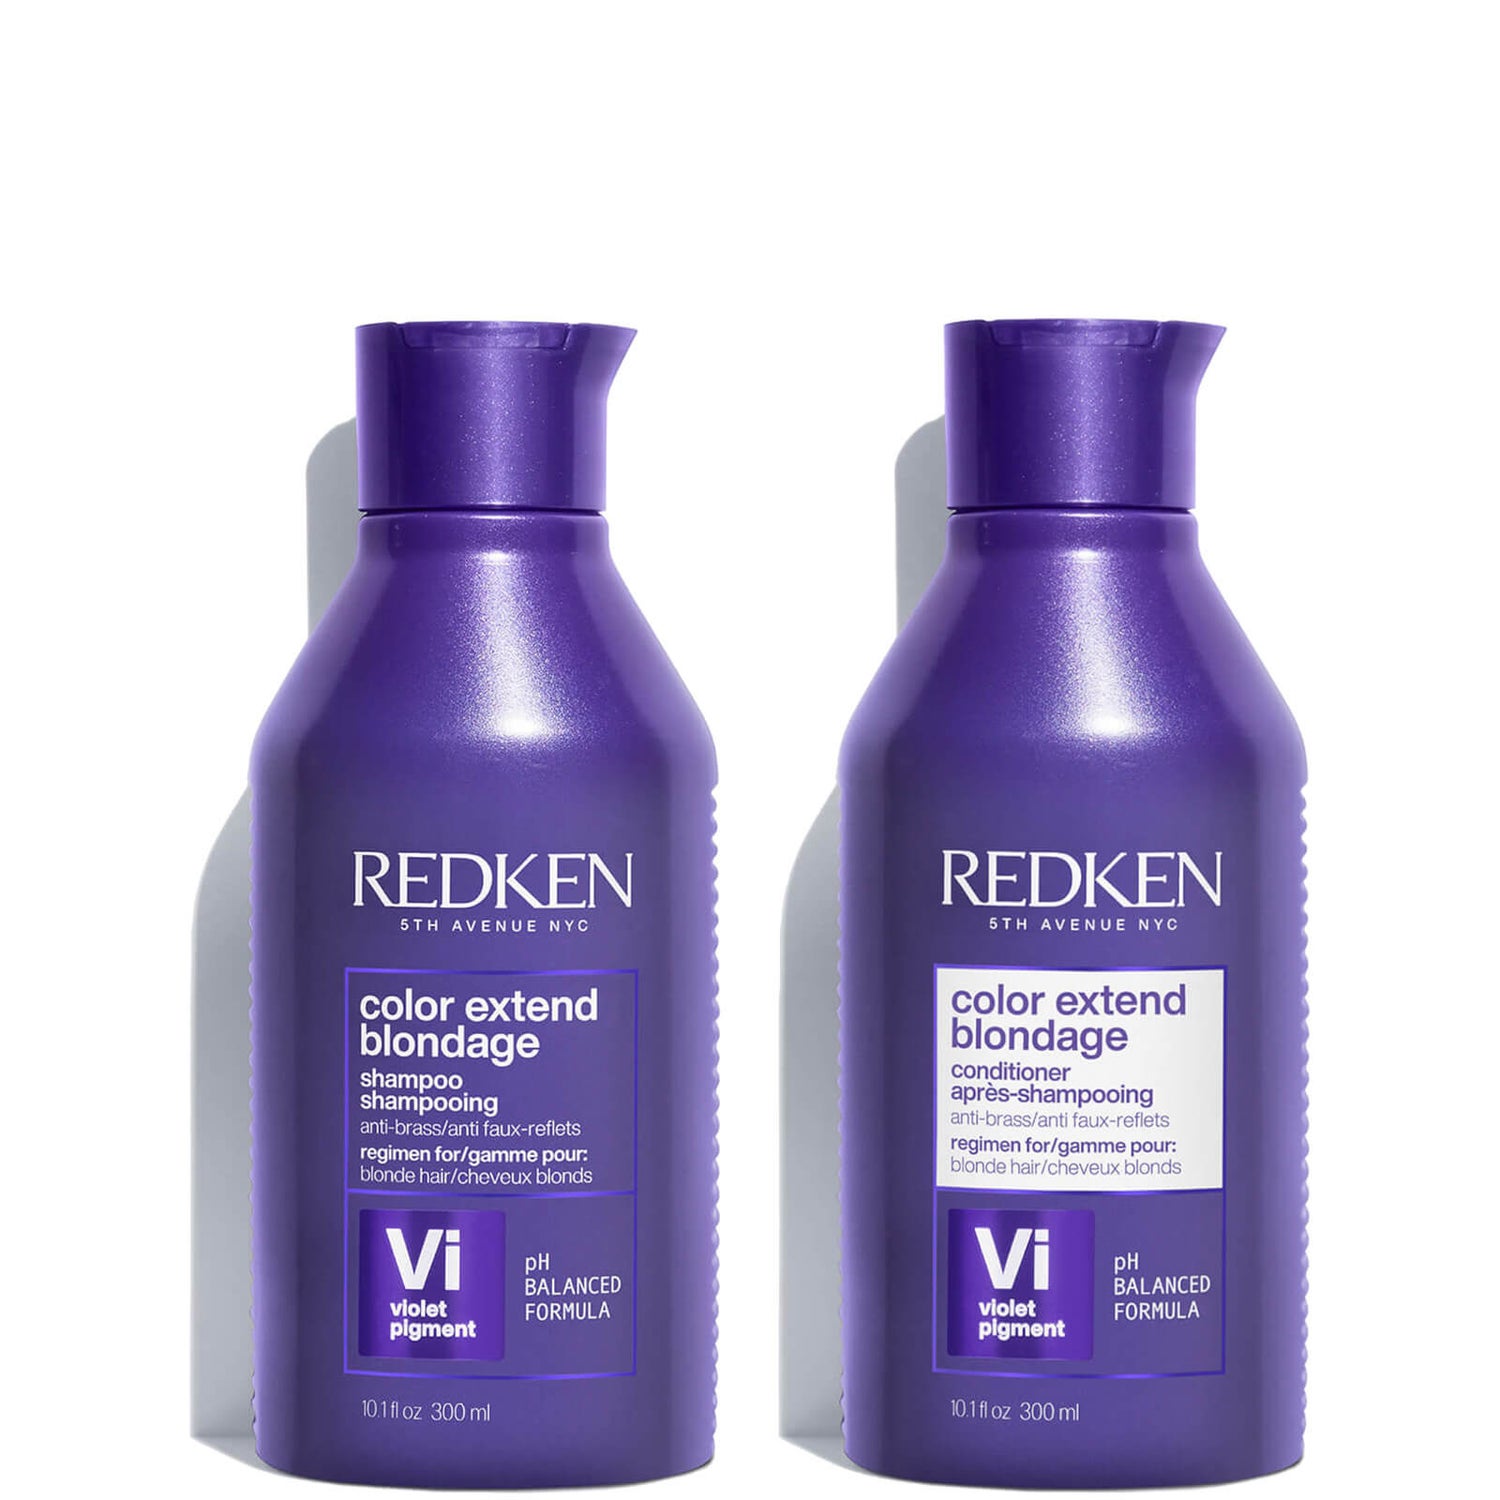 Redken Colour Extend Blondage Shampoo and Conditioner Duo (Worth $92.00)